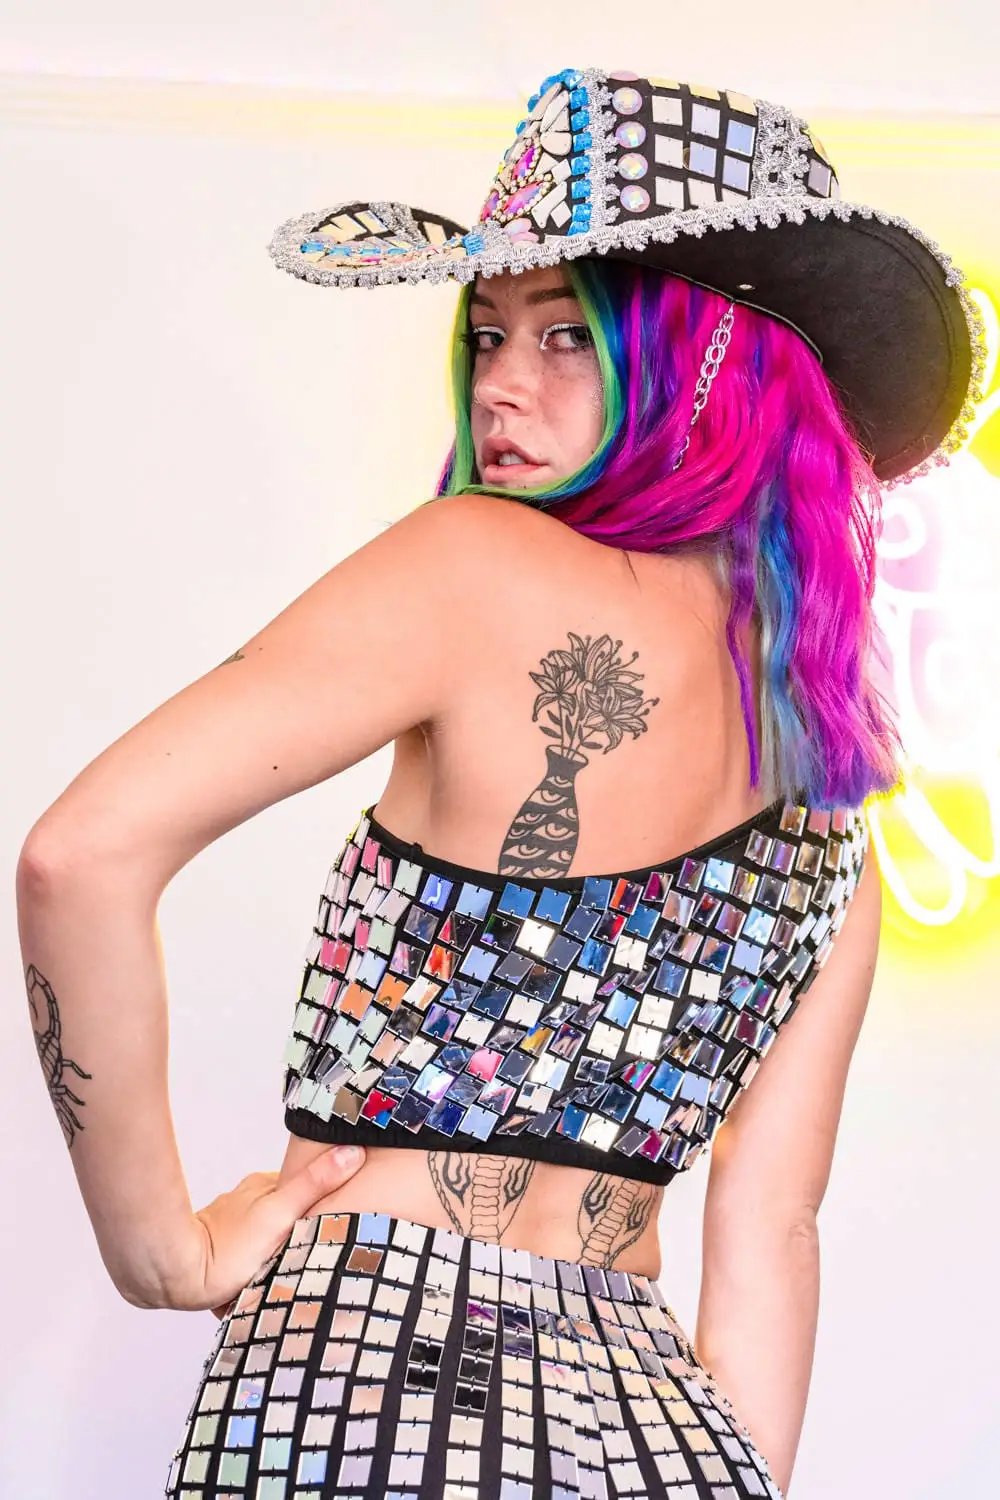 Holographic Triangle Crop Top -   Rave outfits, Festival outfits, Euphoria  clothing